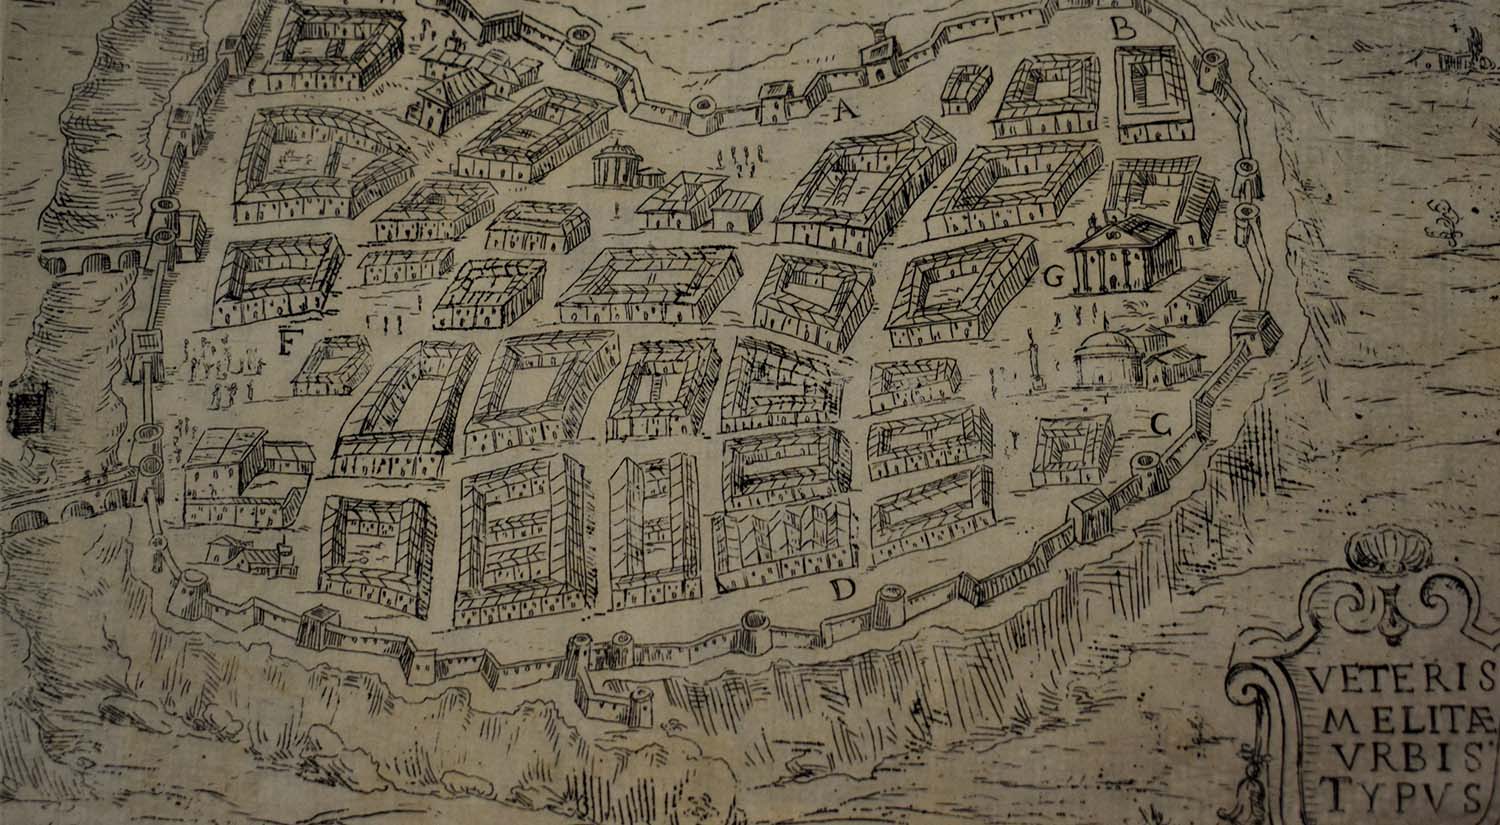 Hypothetical reconstruction of the ancient city of Melite, published by Abela in 1647 (National Museum of Archaeology, Heritage Malta)